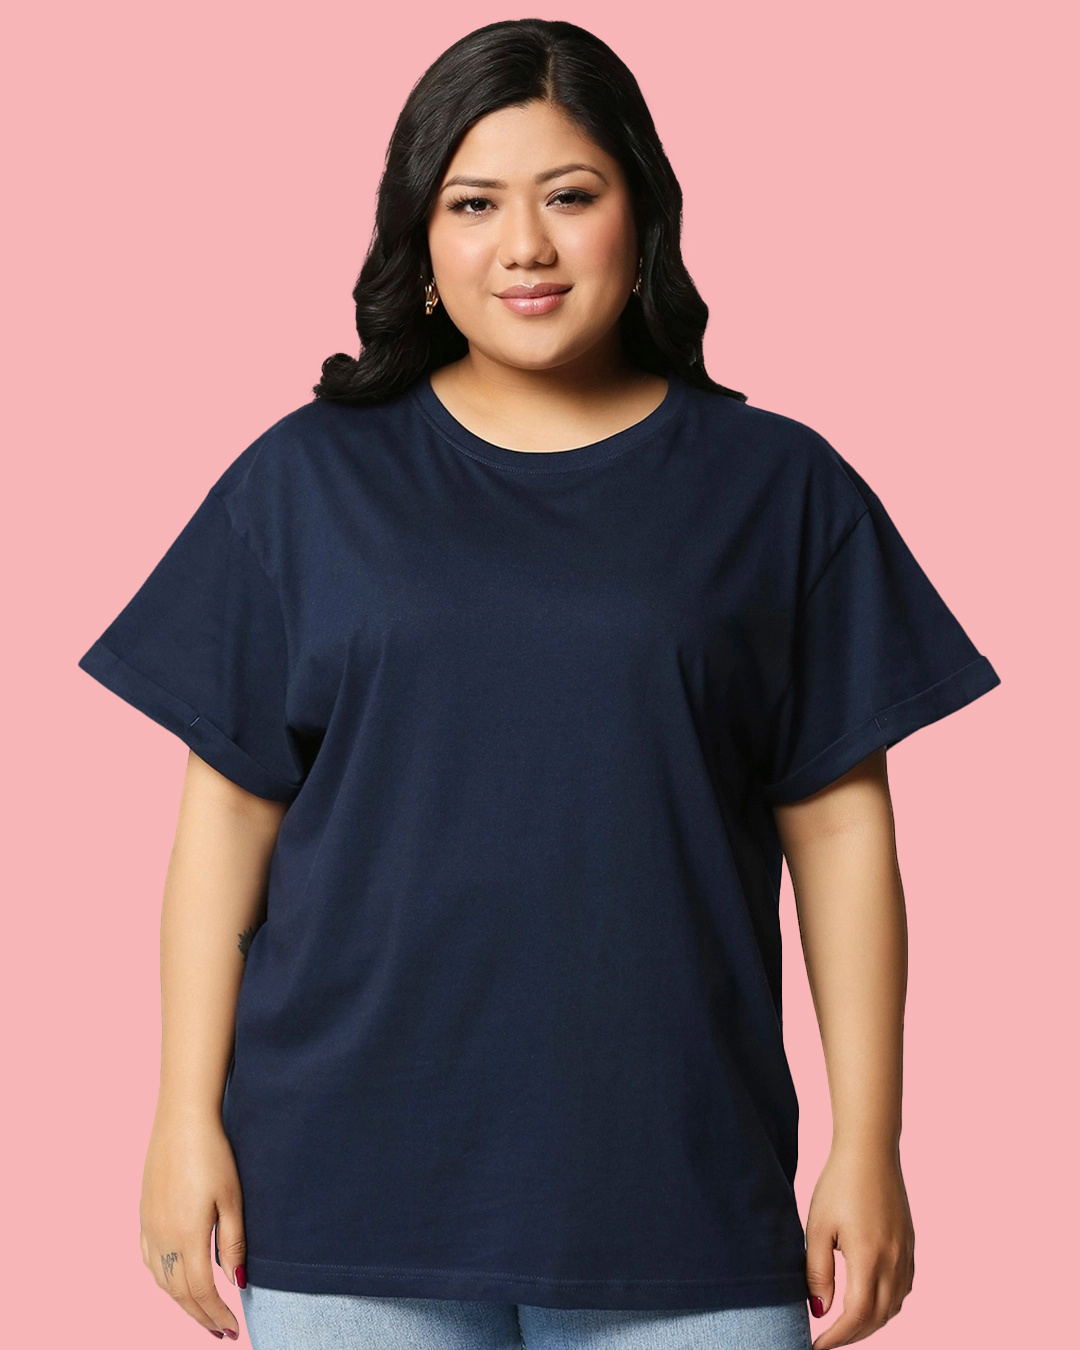 Plus Size Clothing for Women : Buy Low Price Plus Size Women Clothing  Online at Bewakoof